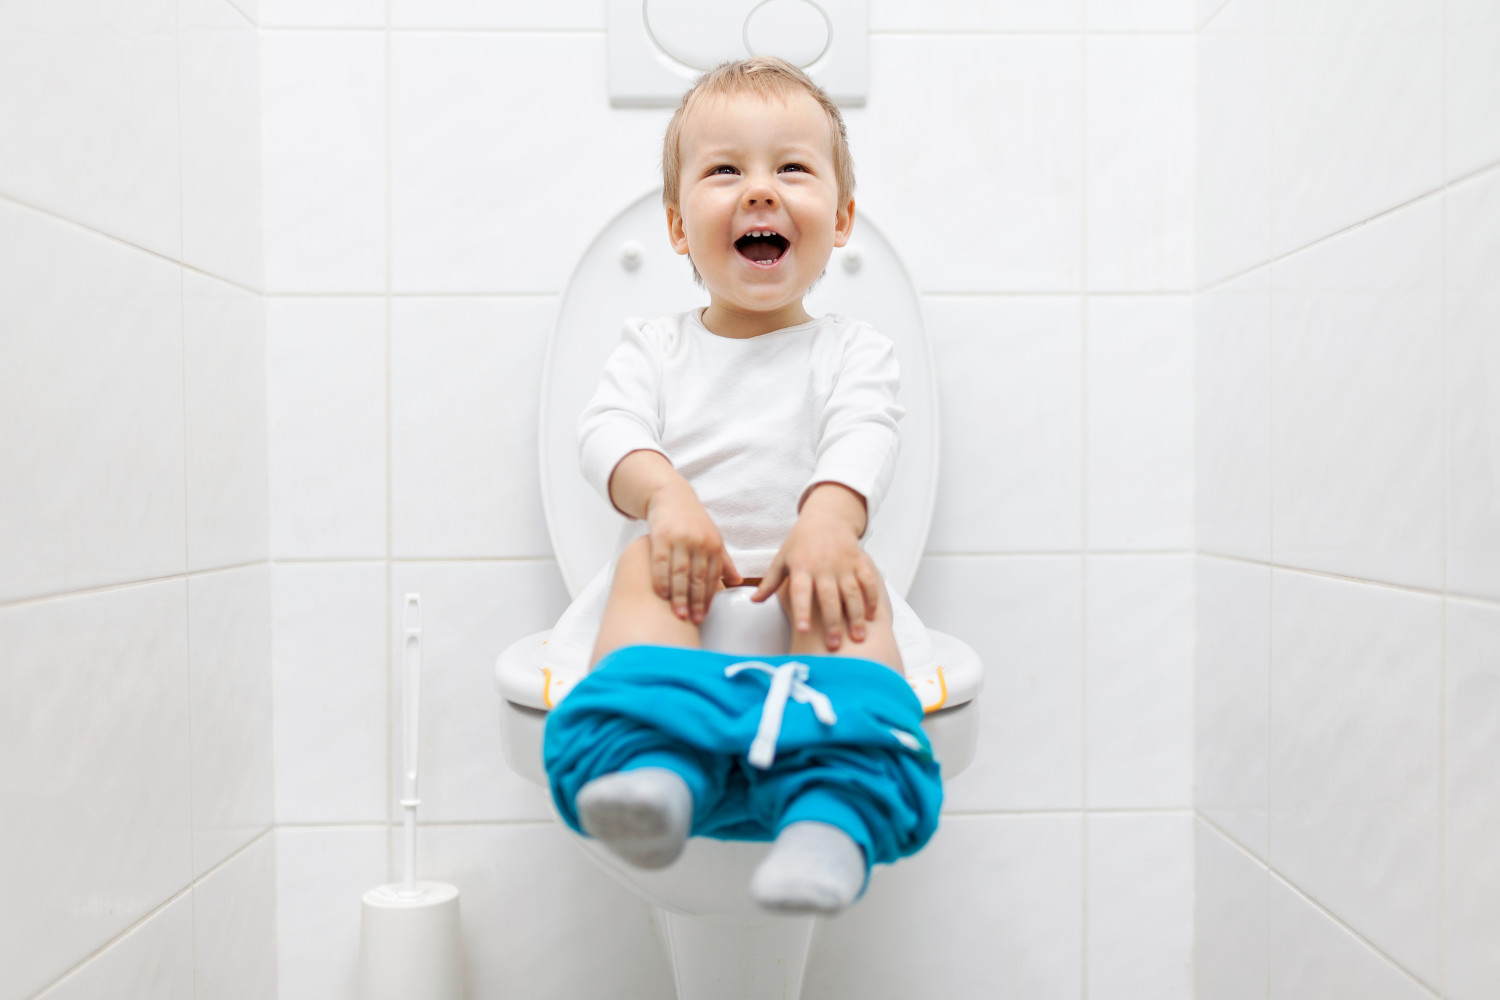 7 MUST Preparation Tips for Successful Potty Training! Very Practical!